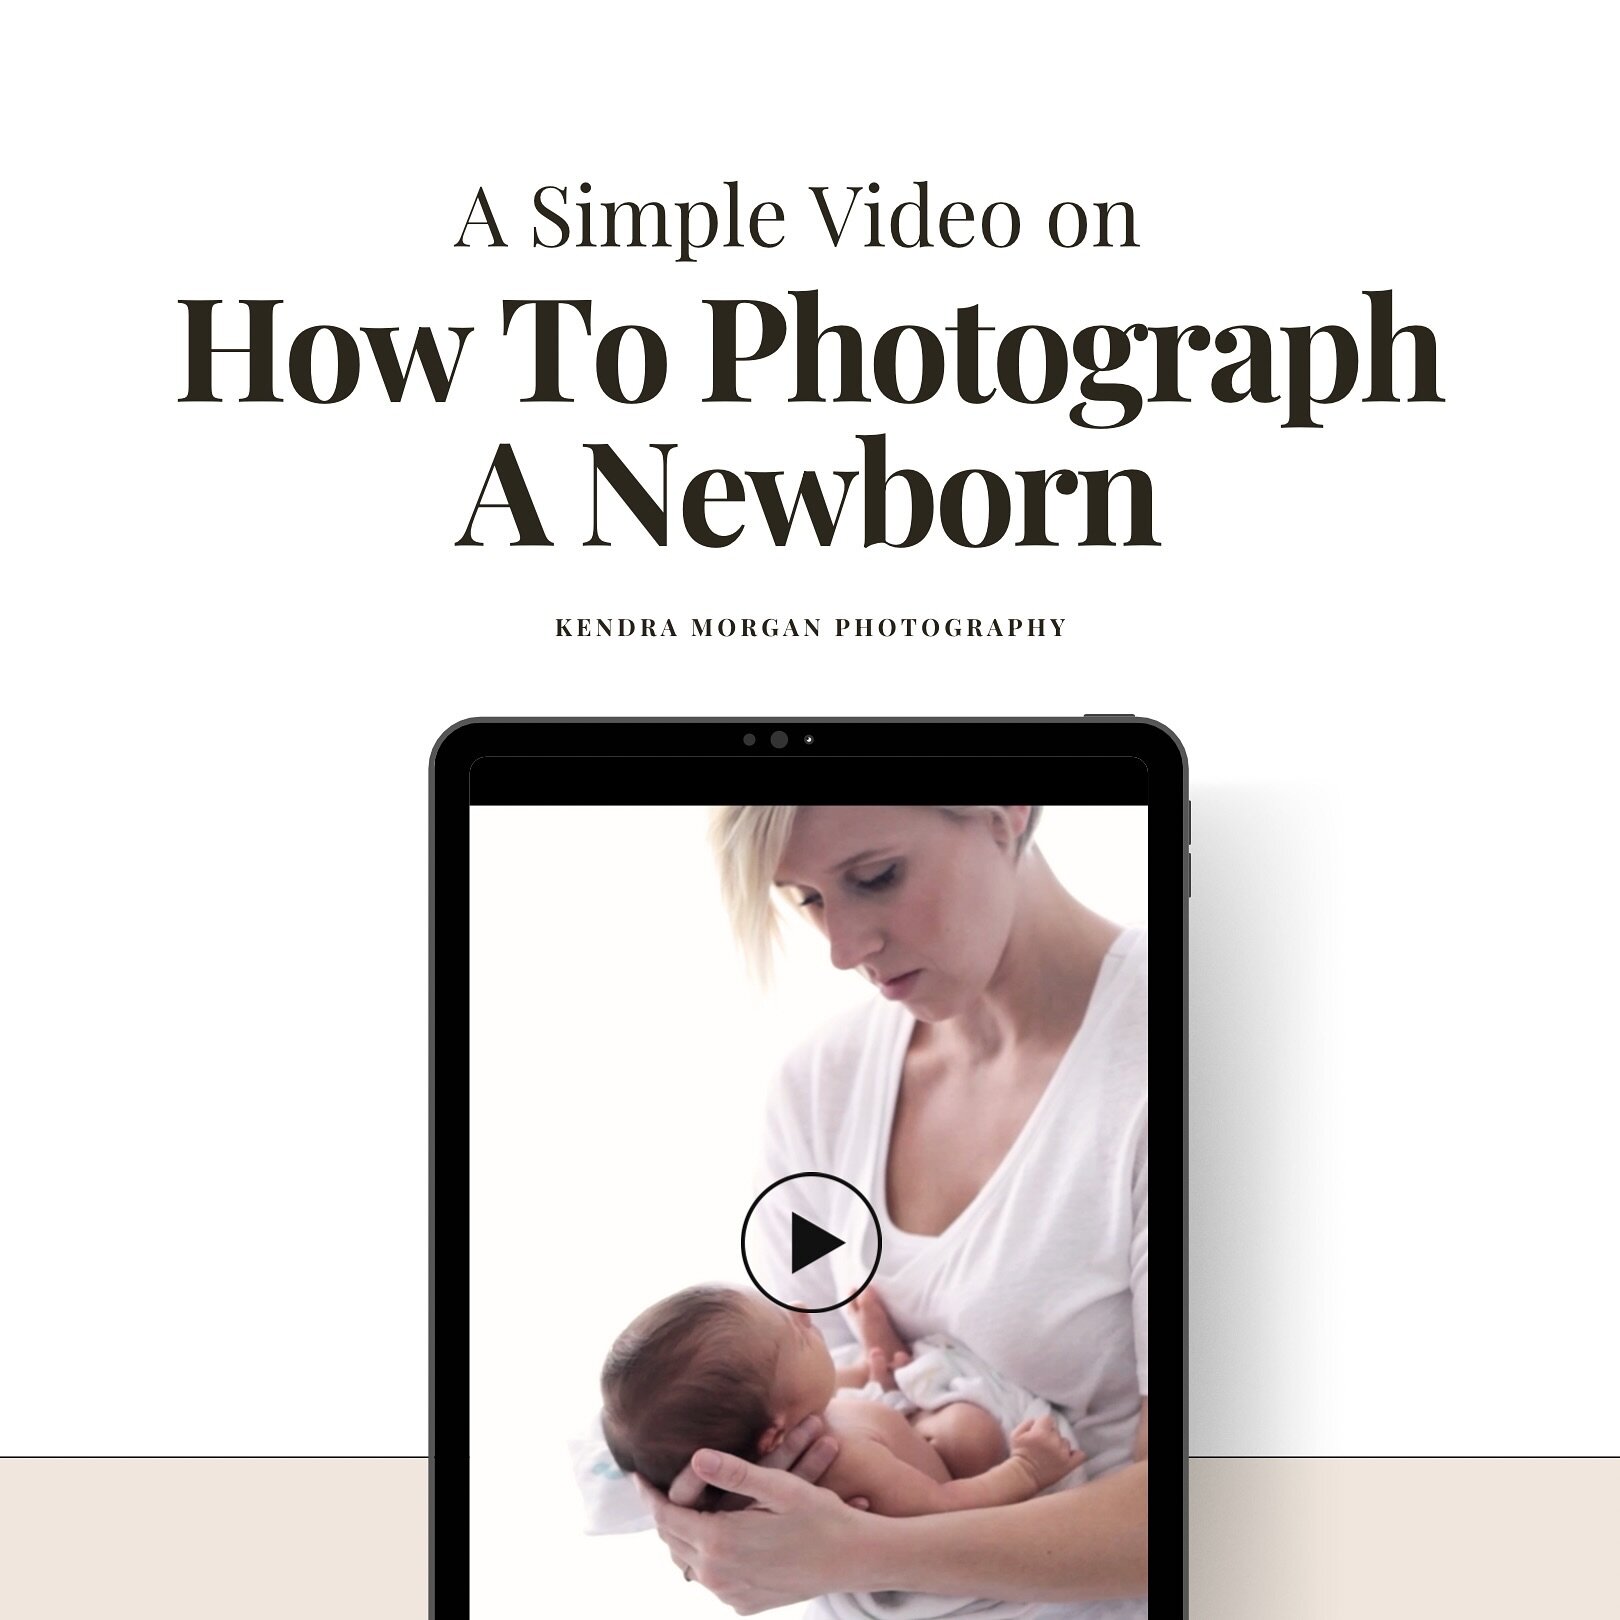 This weekend I was busy sitting behind a computer which is never fun but very rewarding. I checked several things off of the to-do list. One of the things being 👇🏻

✨A video on How To Photograph a Newborn.

I made this video for my clients during t